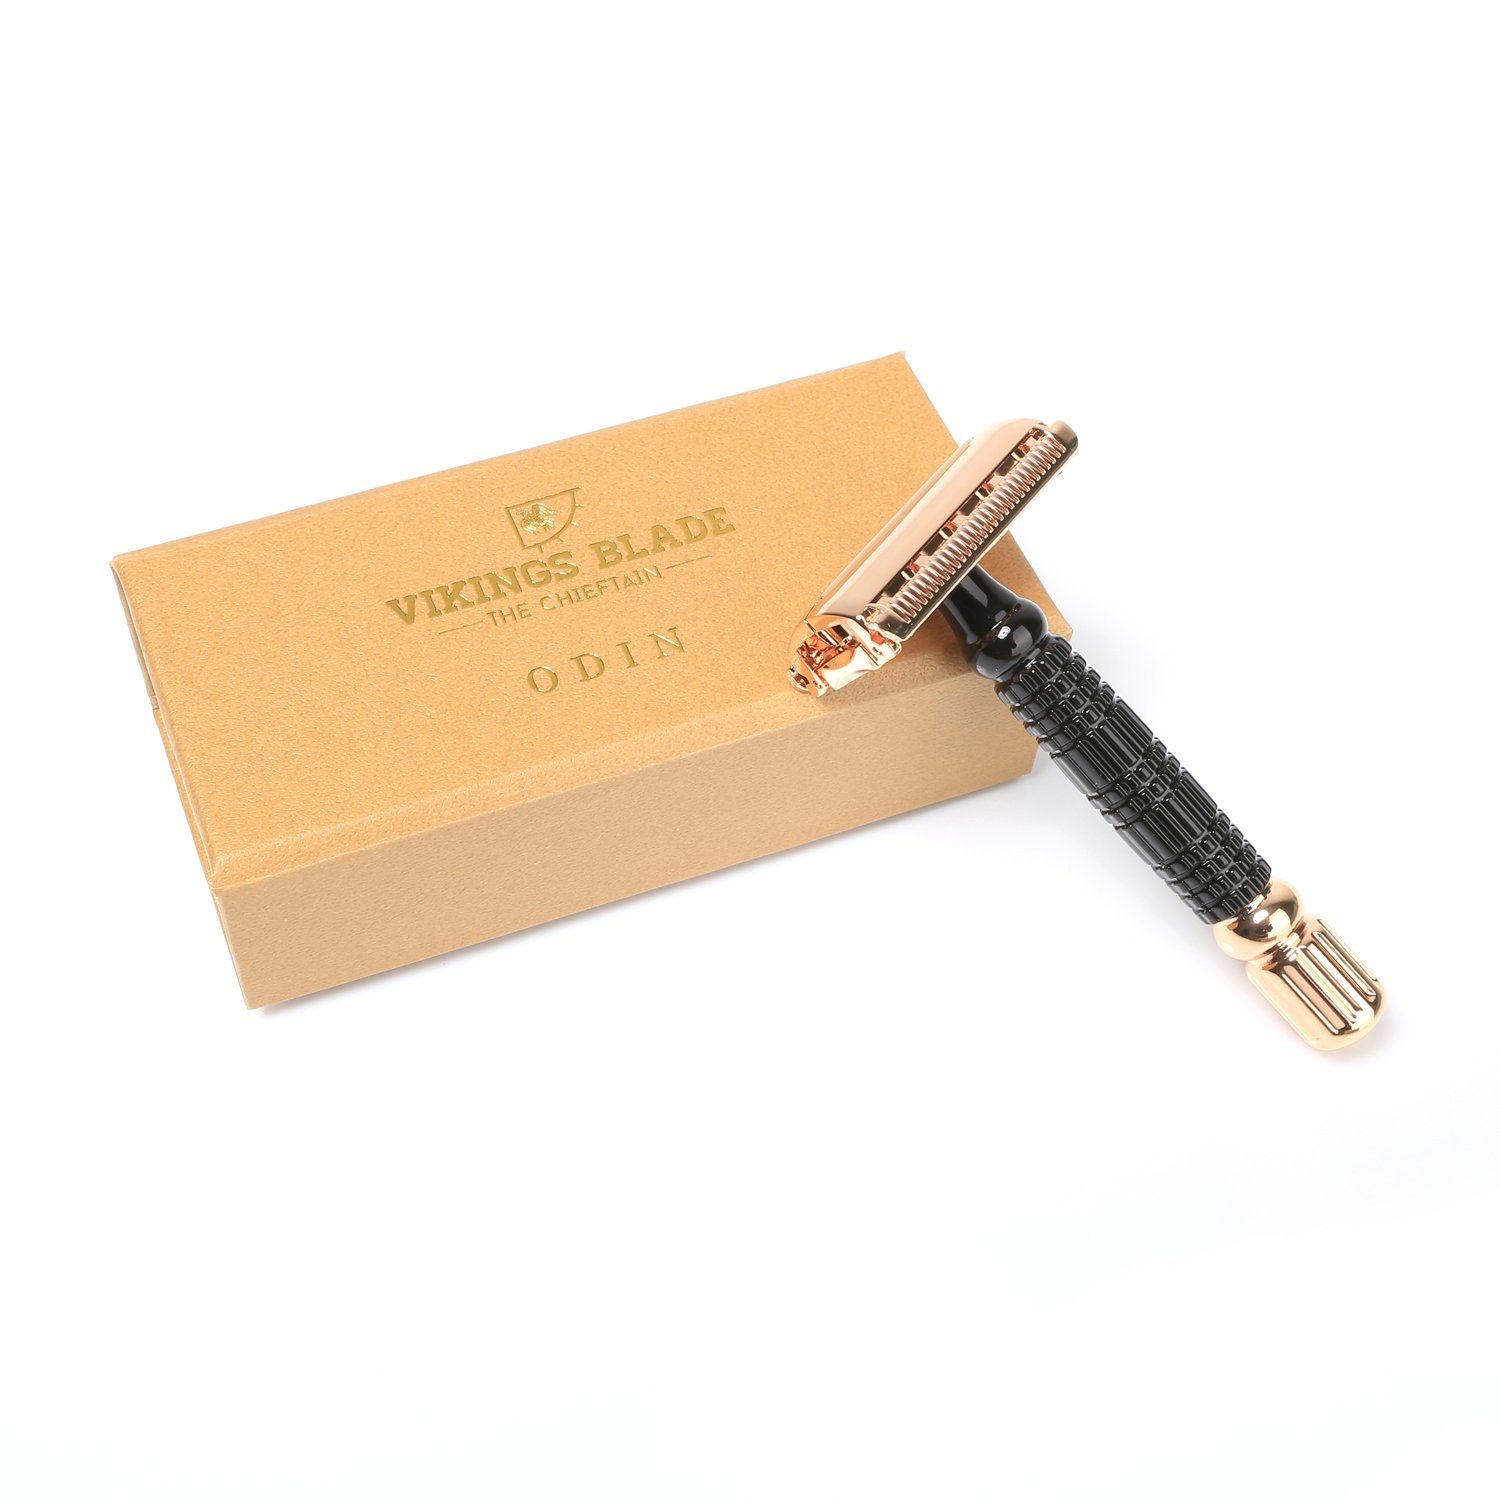 VIKINGS BLADE The Chieftain Safety Razor (Odin Limited Edition)